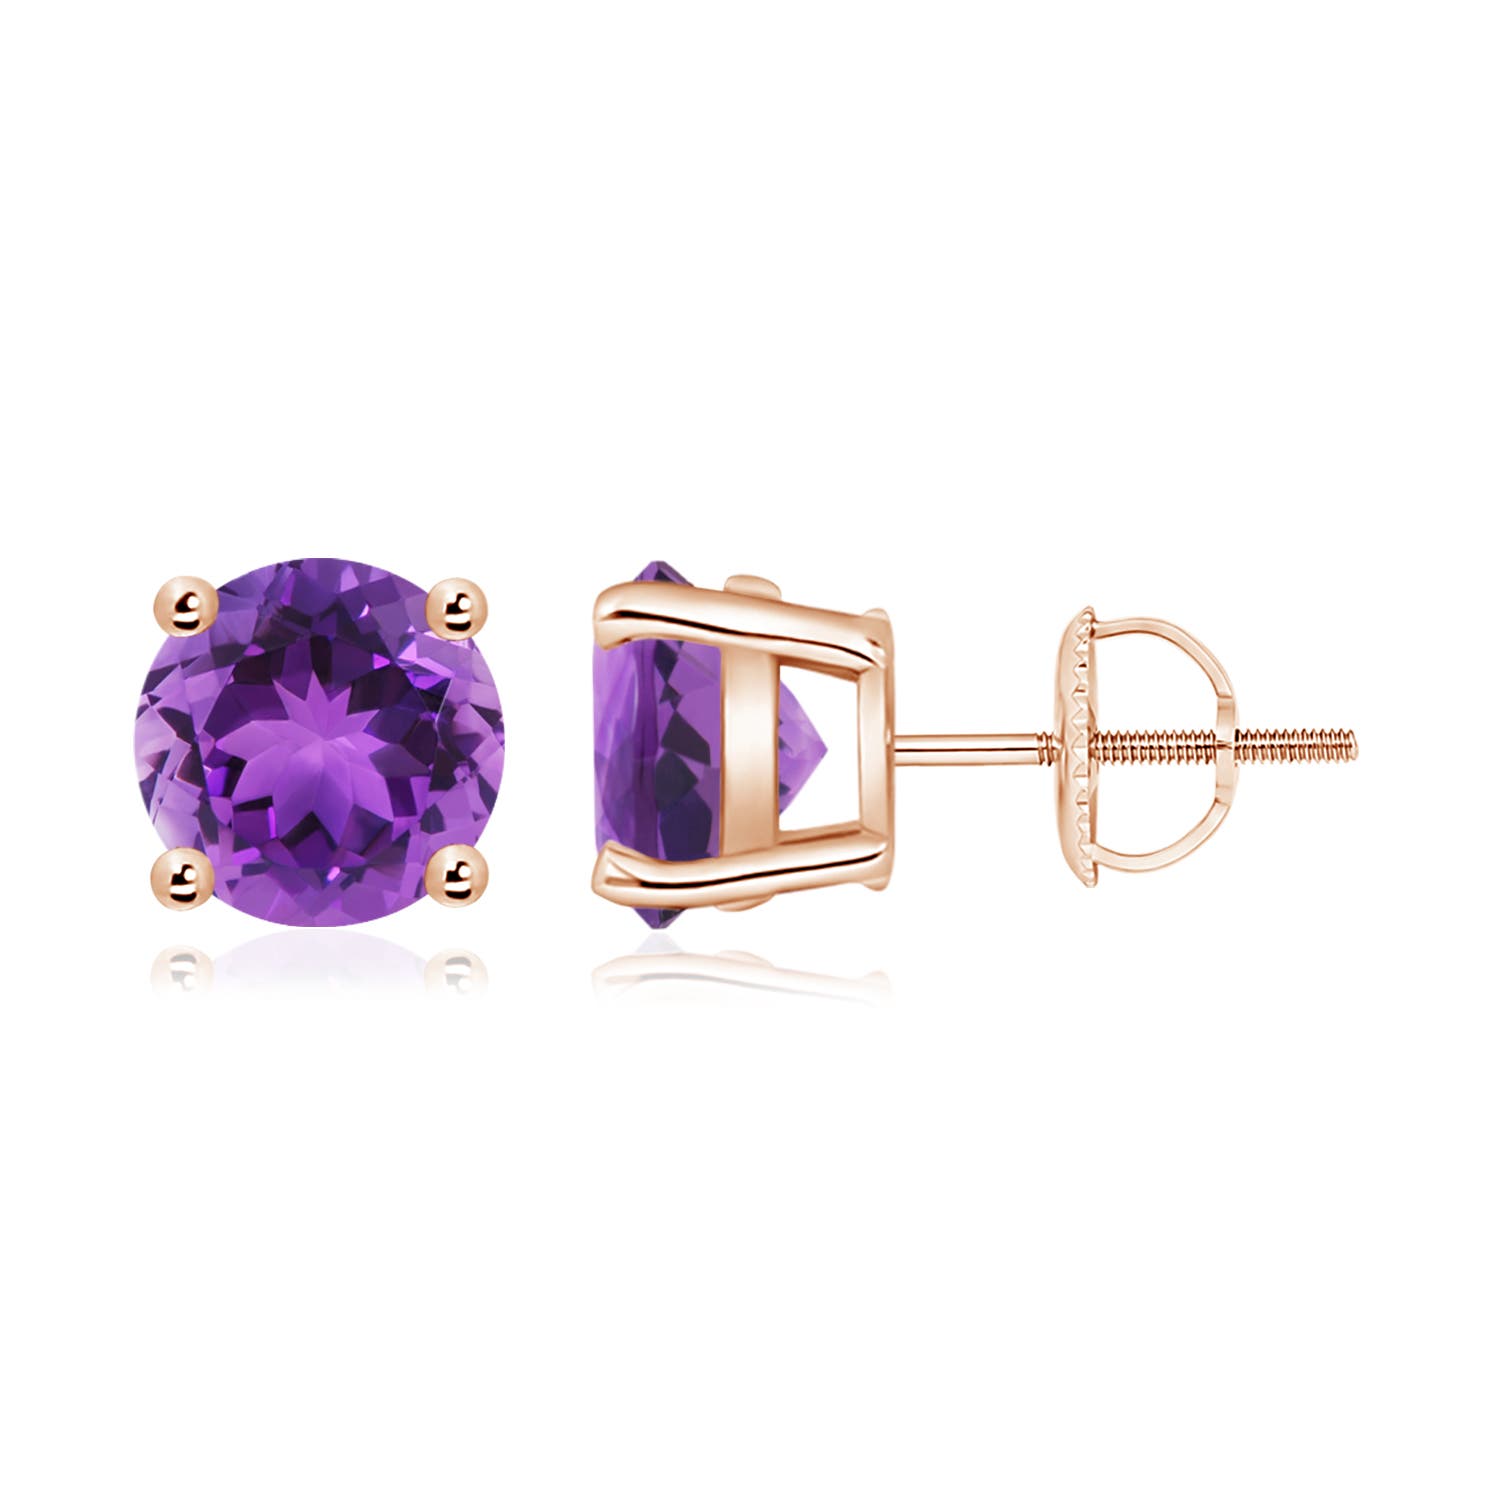 AAA - Amethyst / 3.4 CT / 14 KT Rose Gold